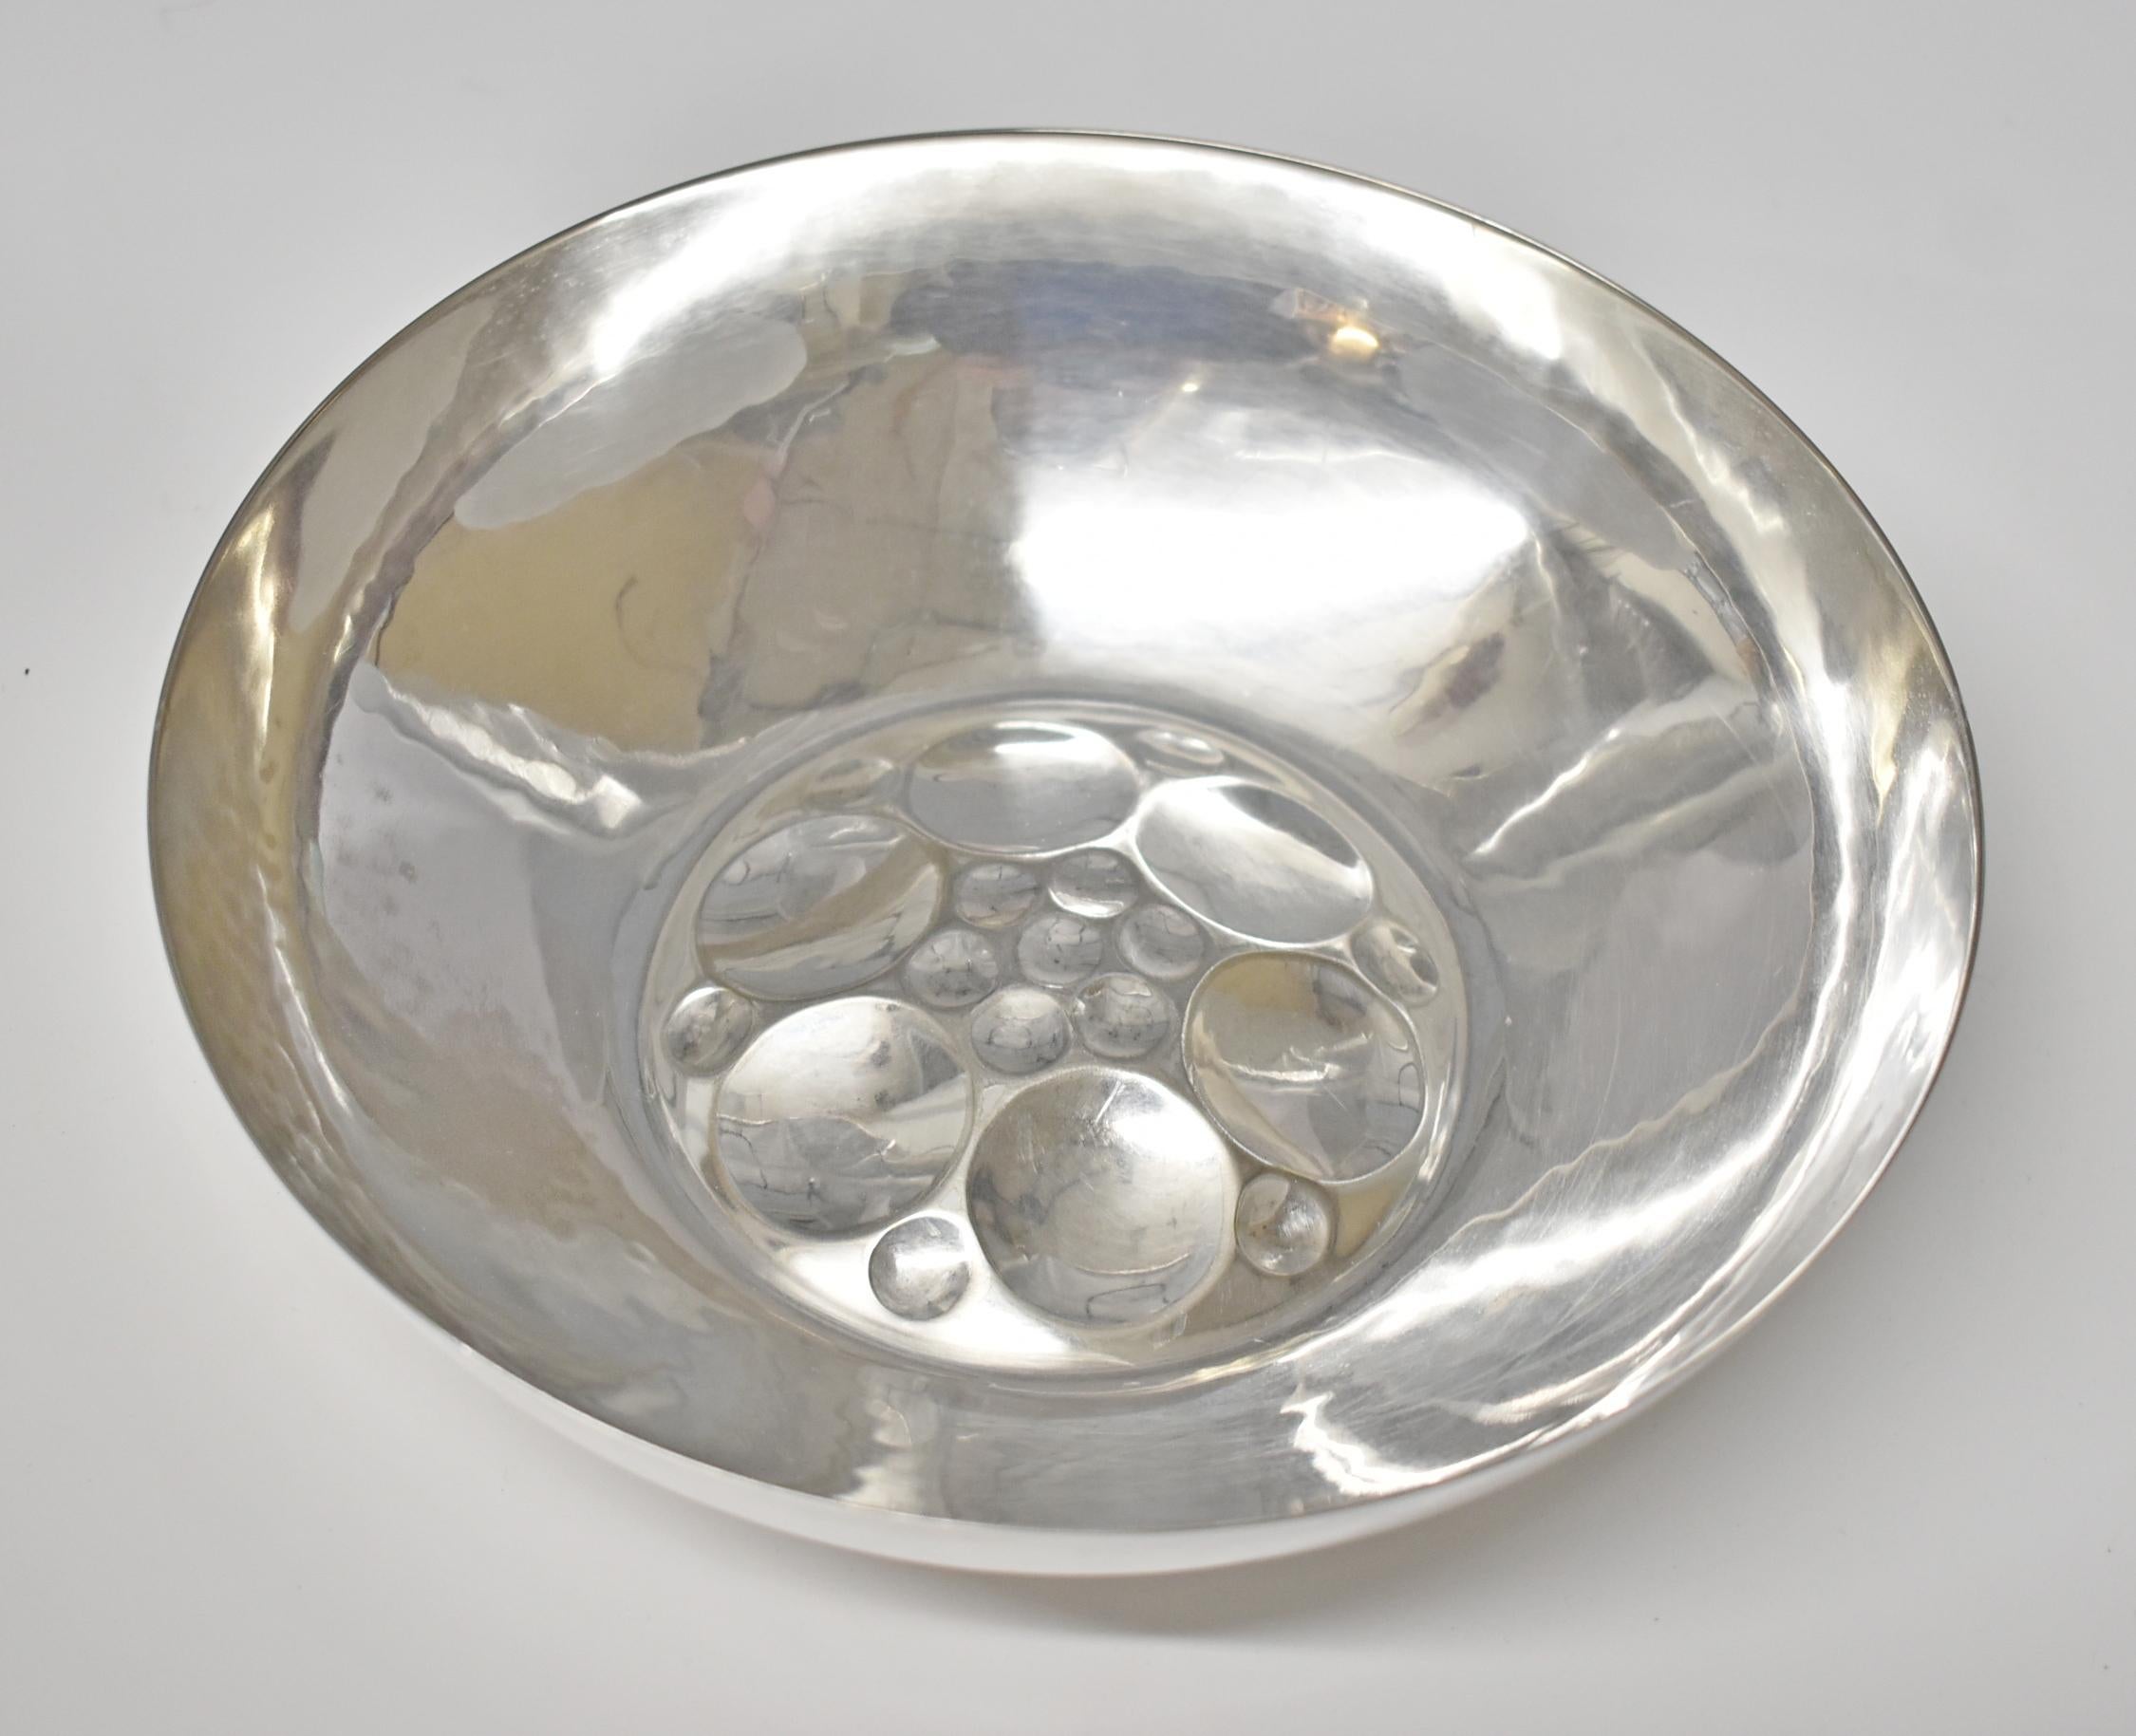 French Provincial Gorham Silver-Plated MMA Reproduction, 14th Century Medieval Hanap French Bowl